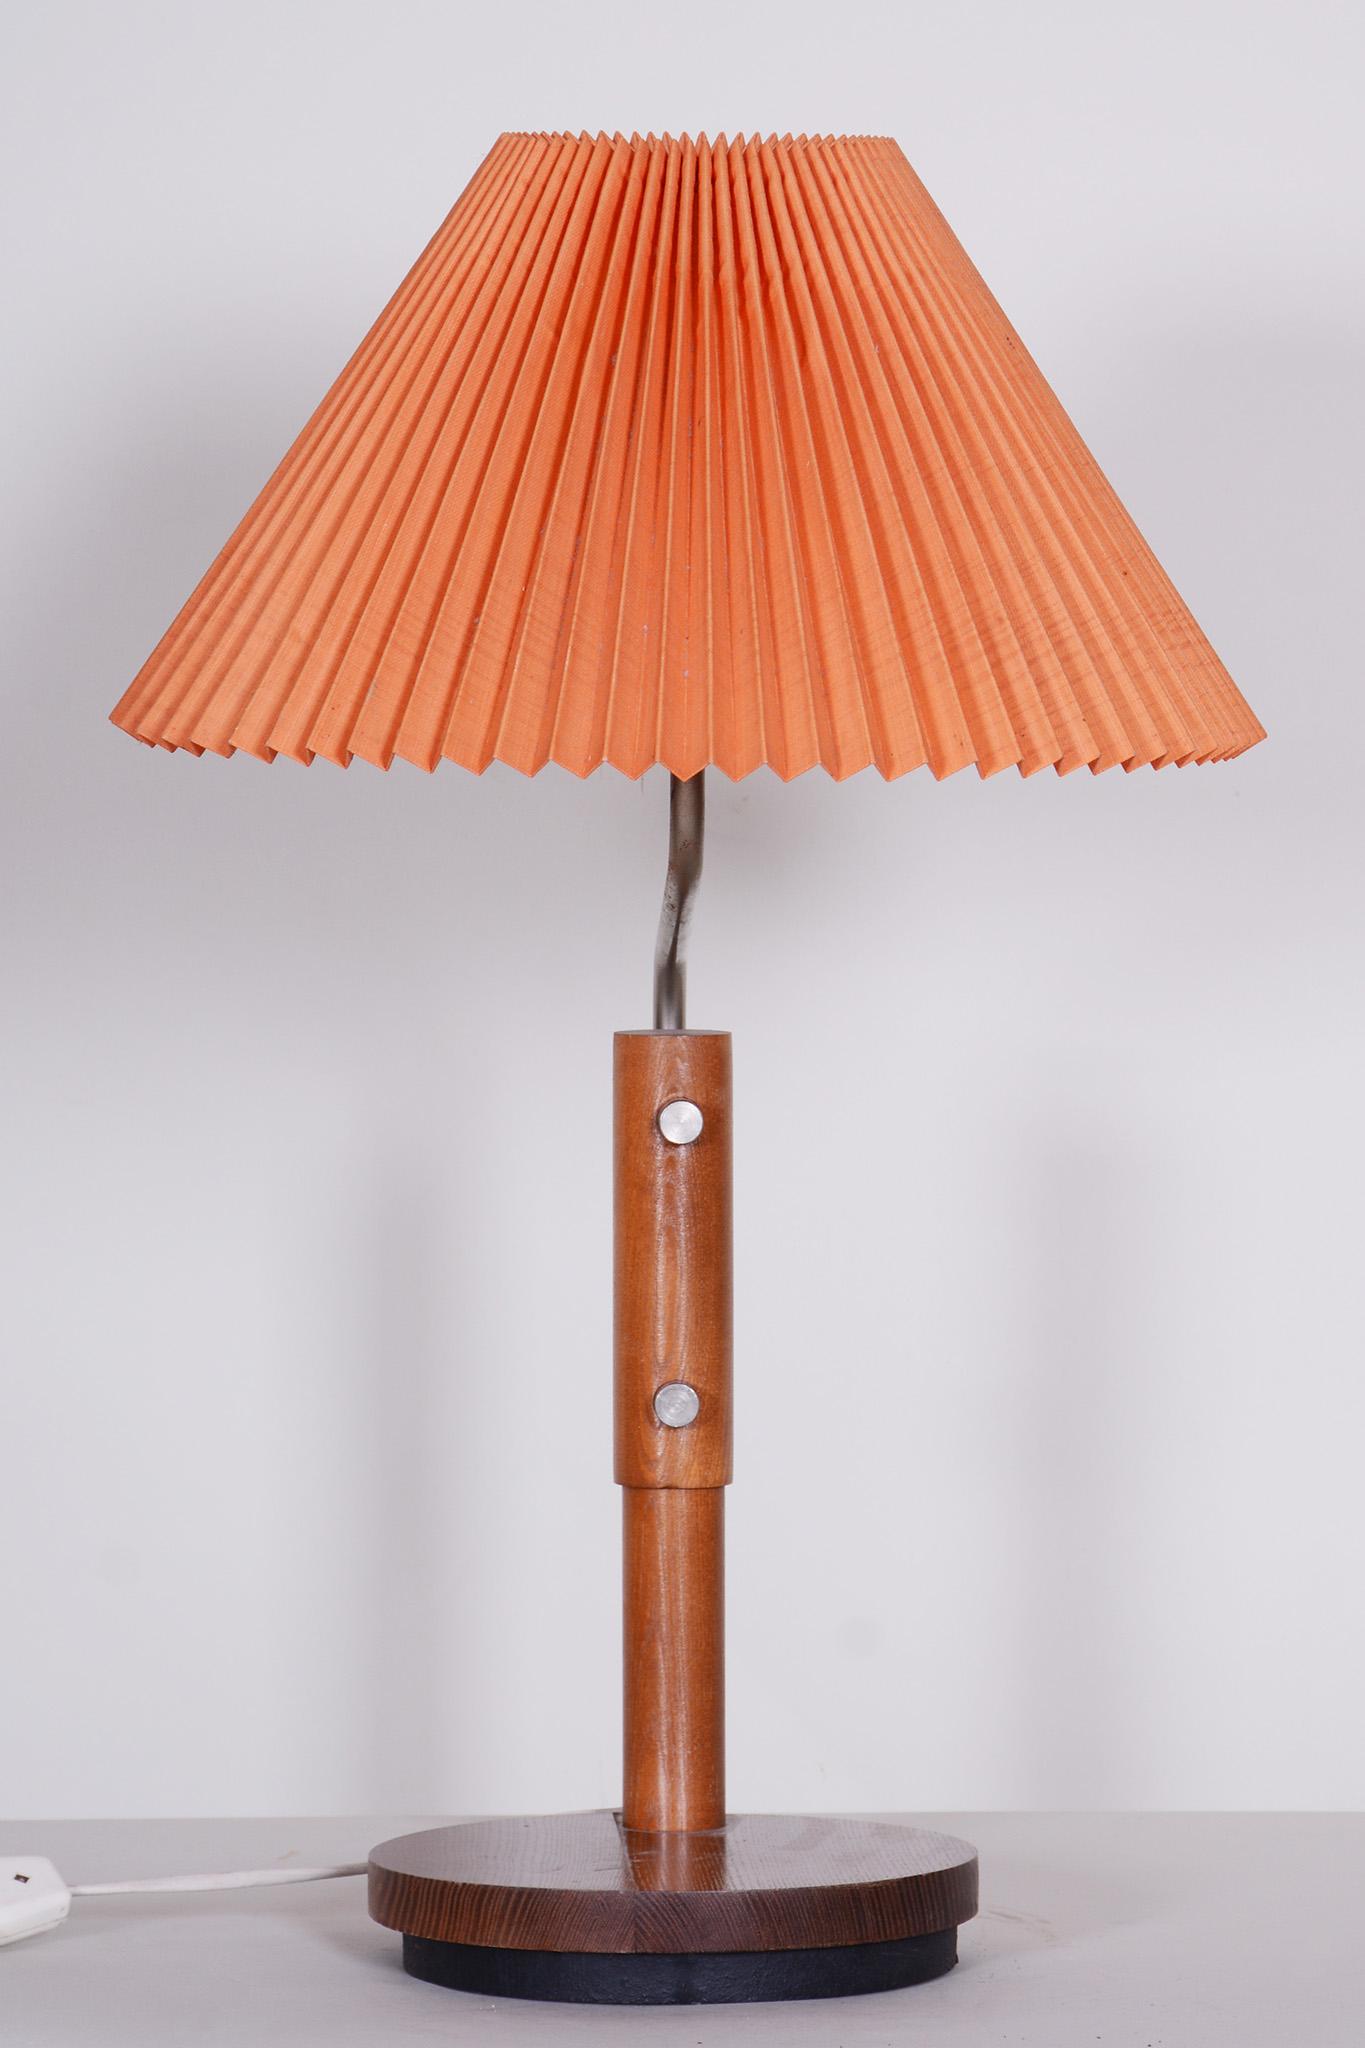 Midcentury Table Lamp, Beech Galvanized Metal, Fully Functional, Czechia, 1960s In Good Condition For Sale In Horomerice, CZ